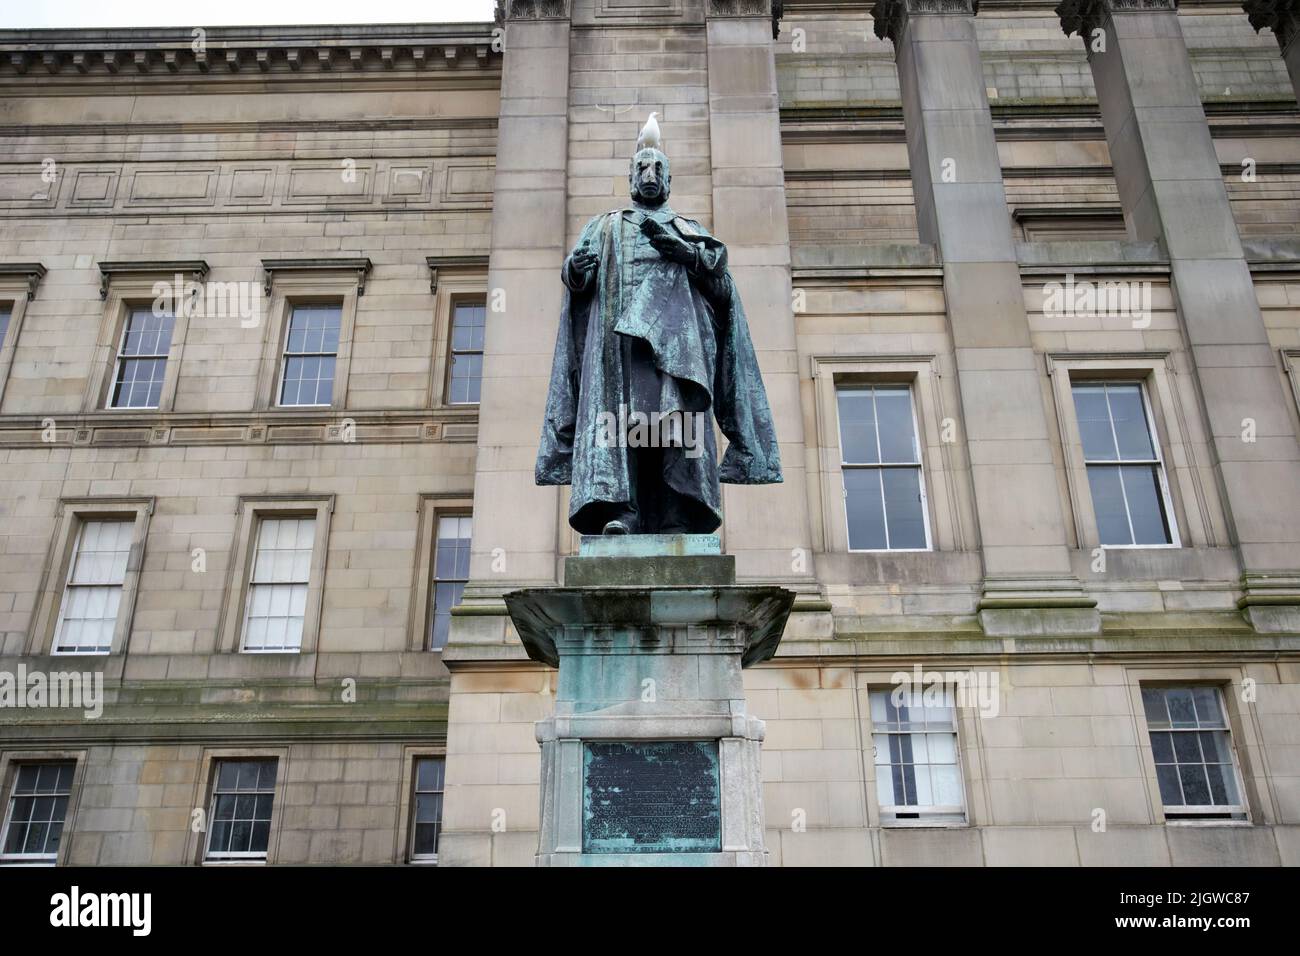 statue of william rathbone founder of the district nursing movement and university of liverpool St Johns Gardens liverpool england uk Stock Photo